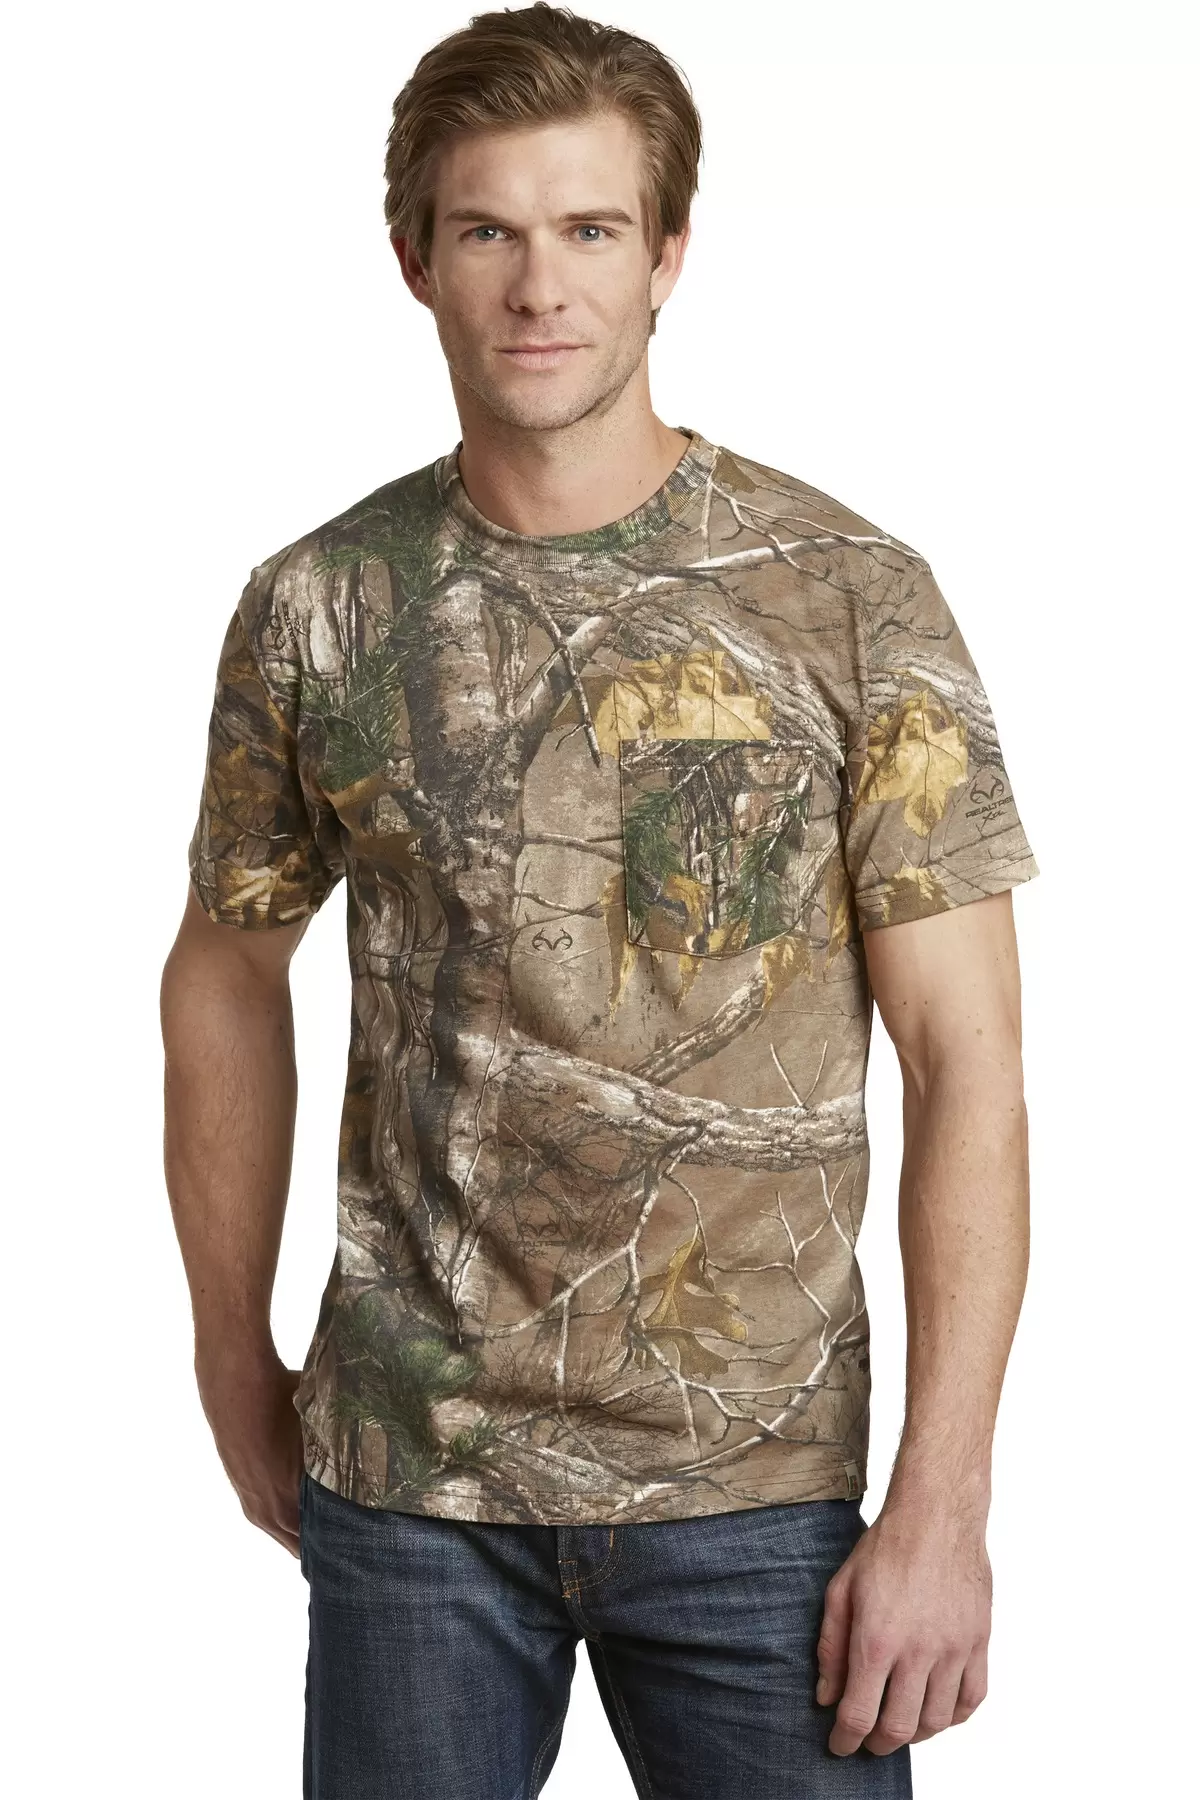 Russell Outdoors - Realtree Explorer 100% Cotton T-Shirt with Pocket - S021R - Realtree Xtra, S